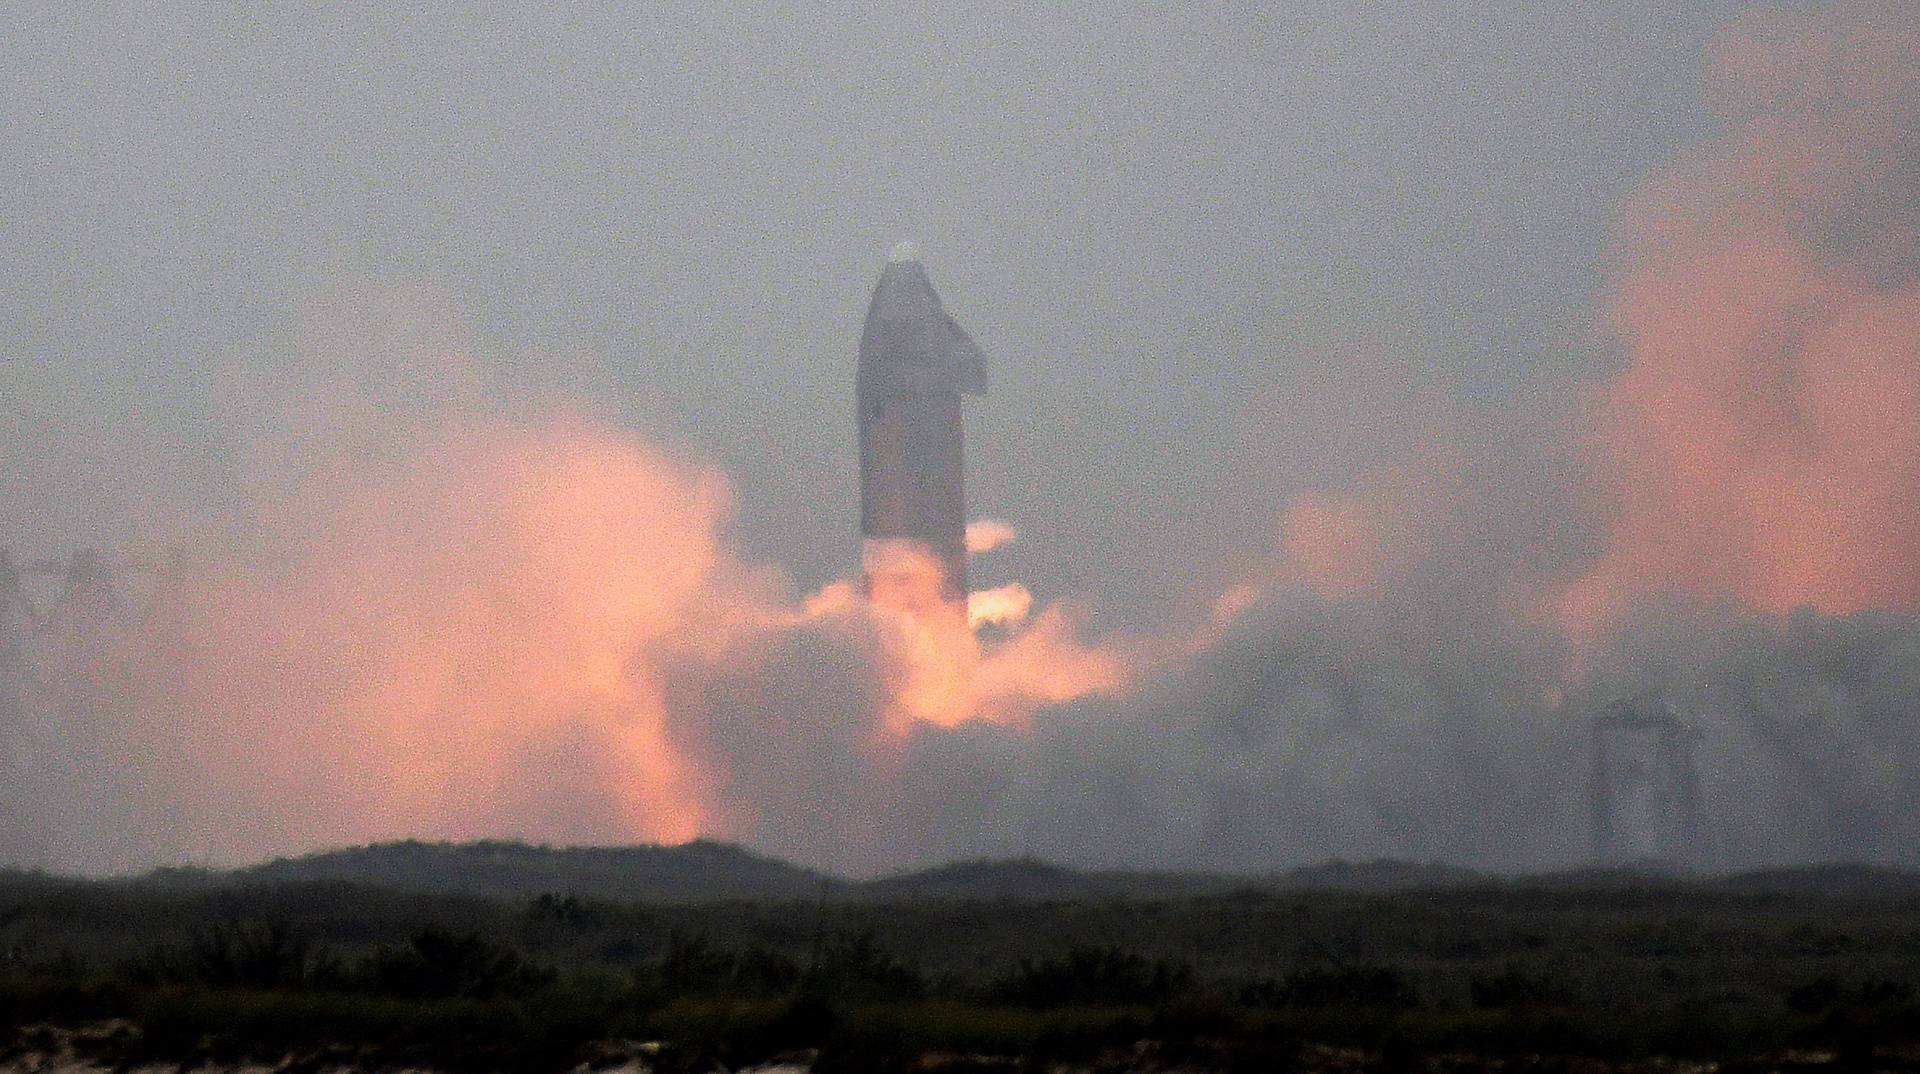 SpaceX conducts test launch of SN15 starship prototype from Boca Chica, Texas